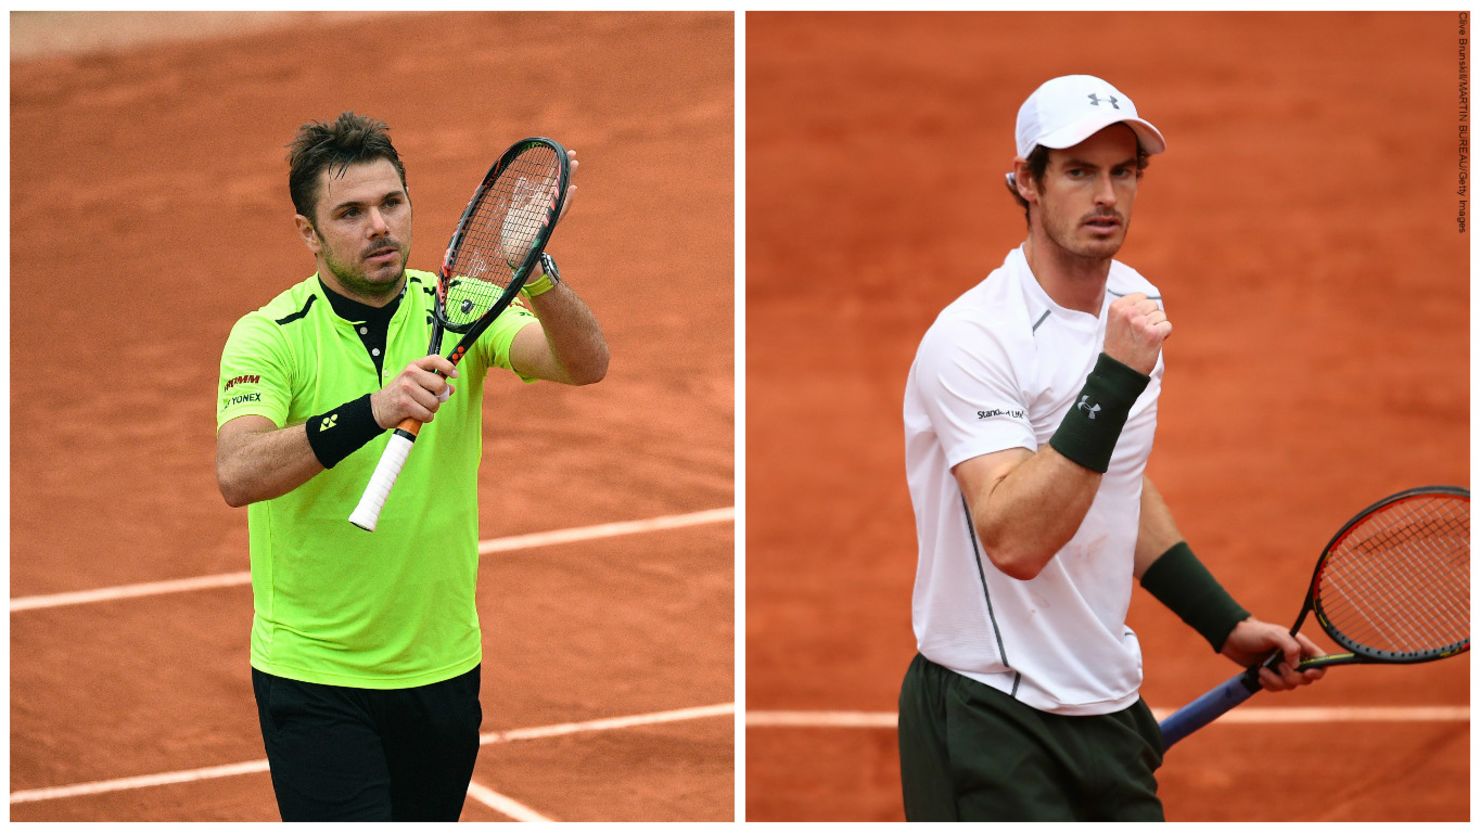 Andy Murray and Stanislas Wawrinka are through to French Open quarterfinals